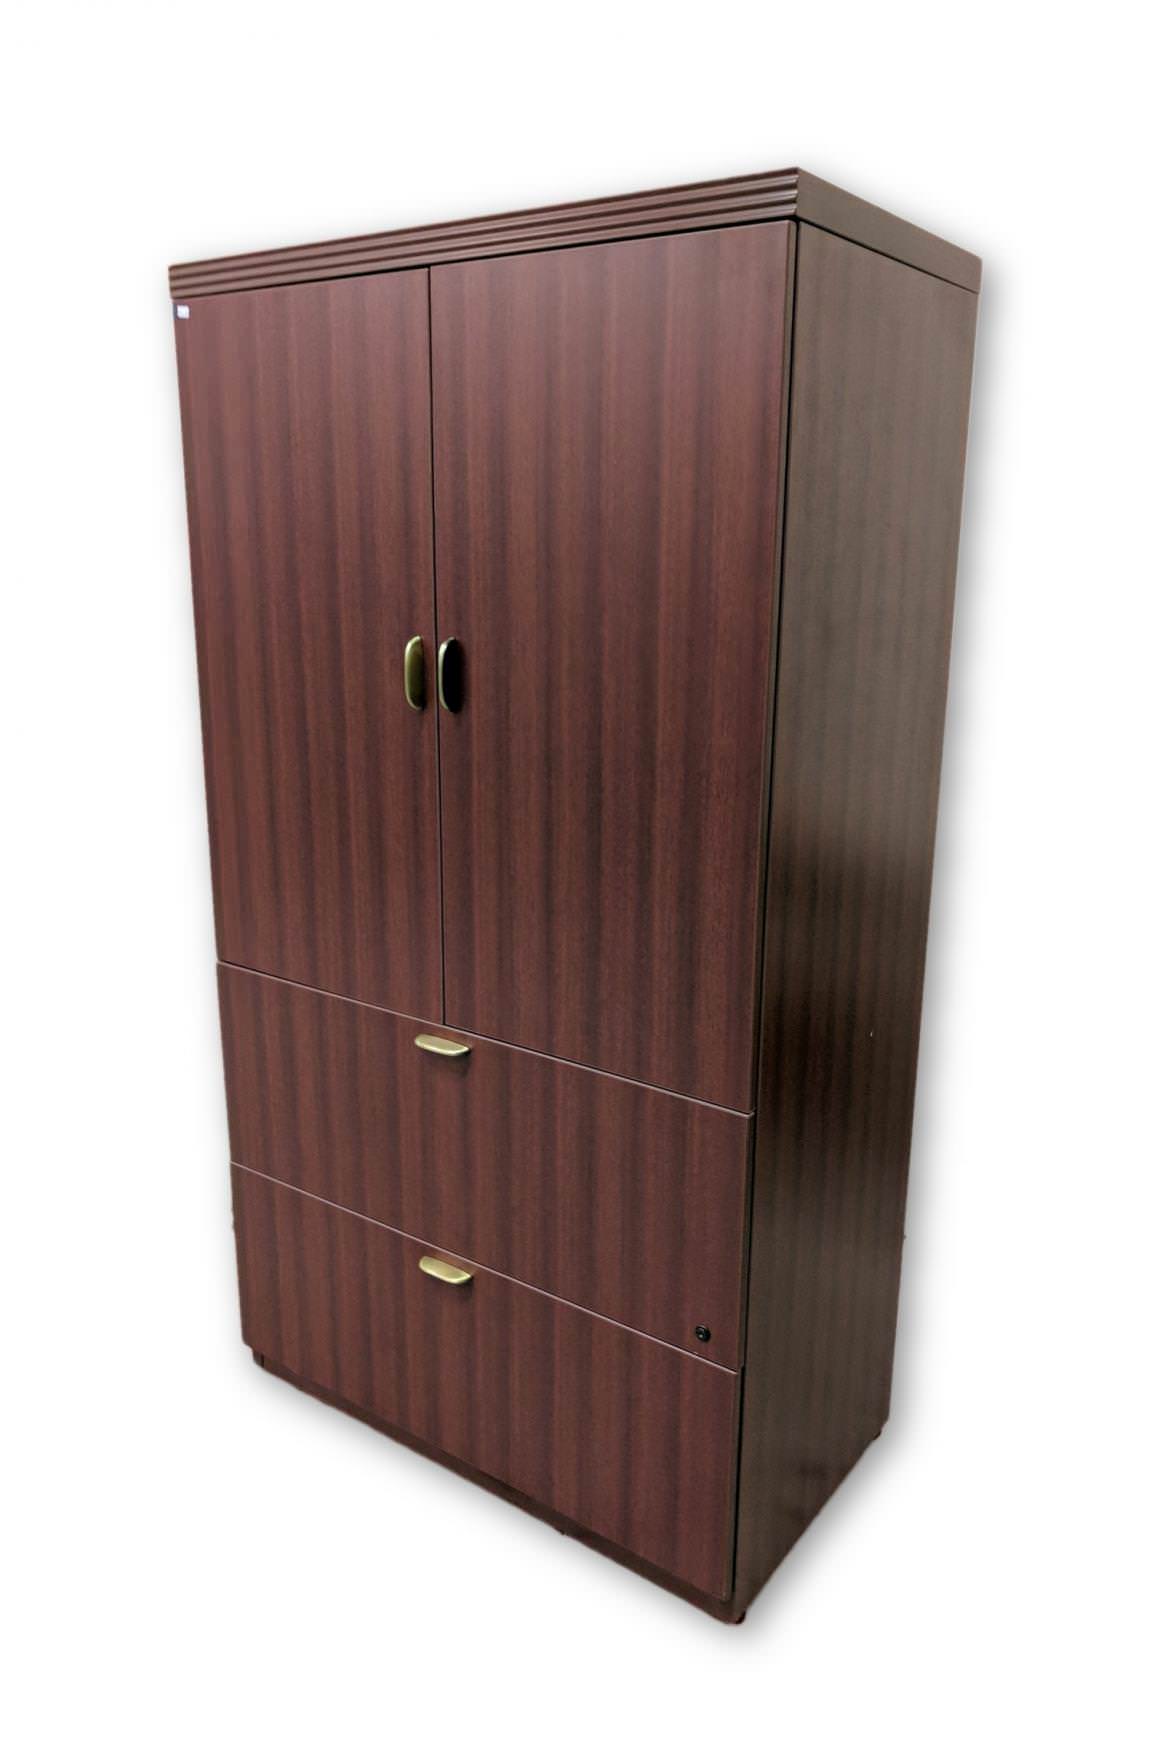 20 Inch Wide Cabinet